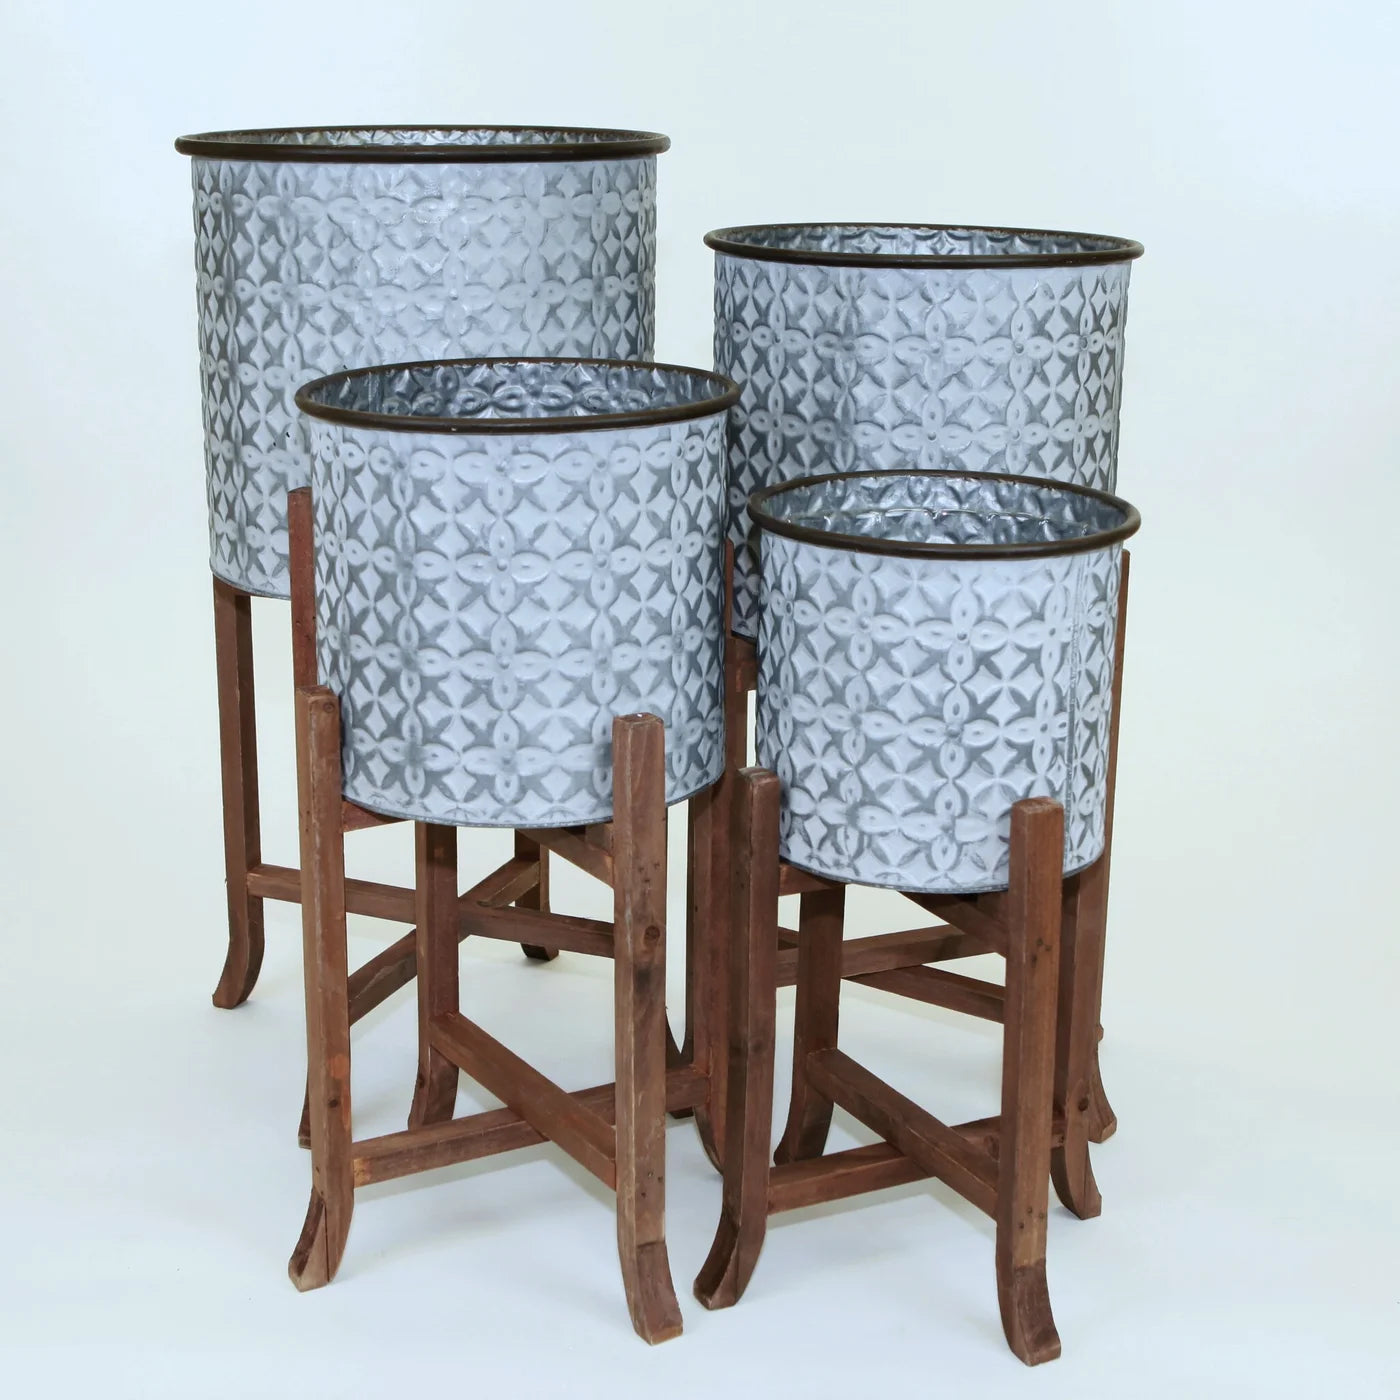 Mosaic Metal Plant Stand